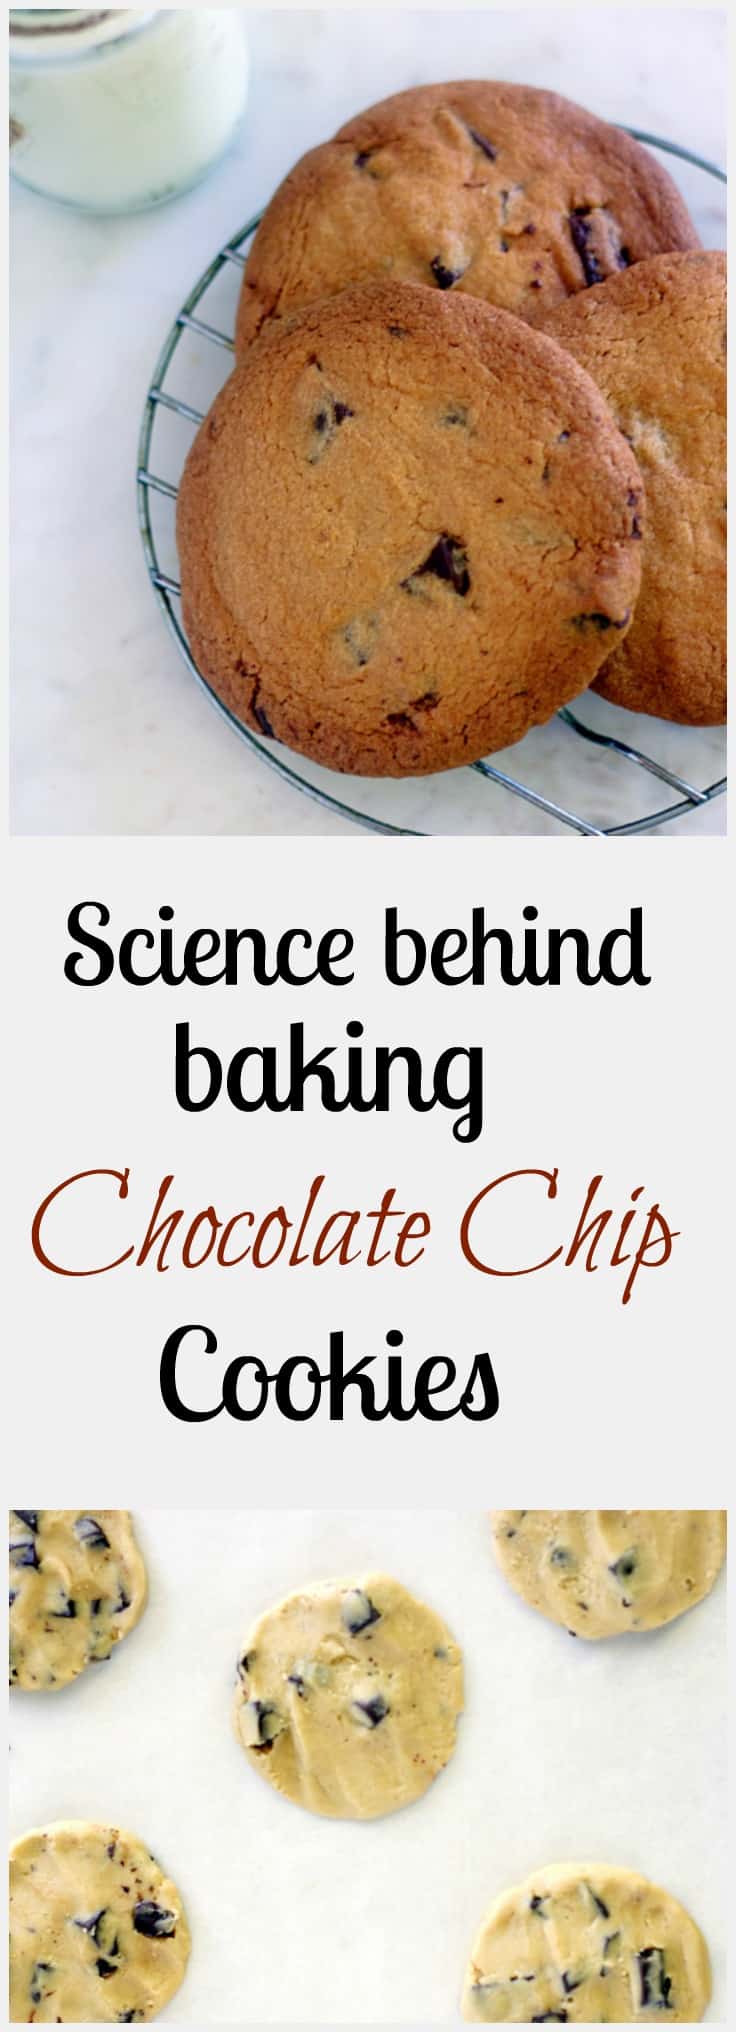 science-behind-chocolate-chip-cookies step by step method of baking cookies with amazing food photography and all the tips and tricks